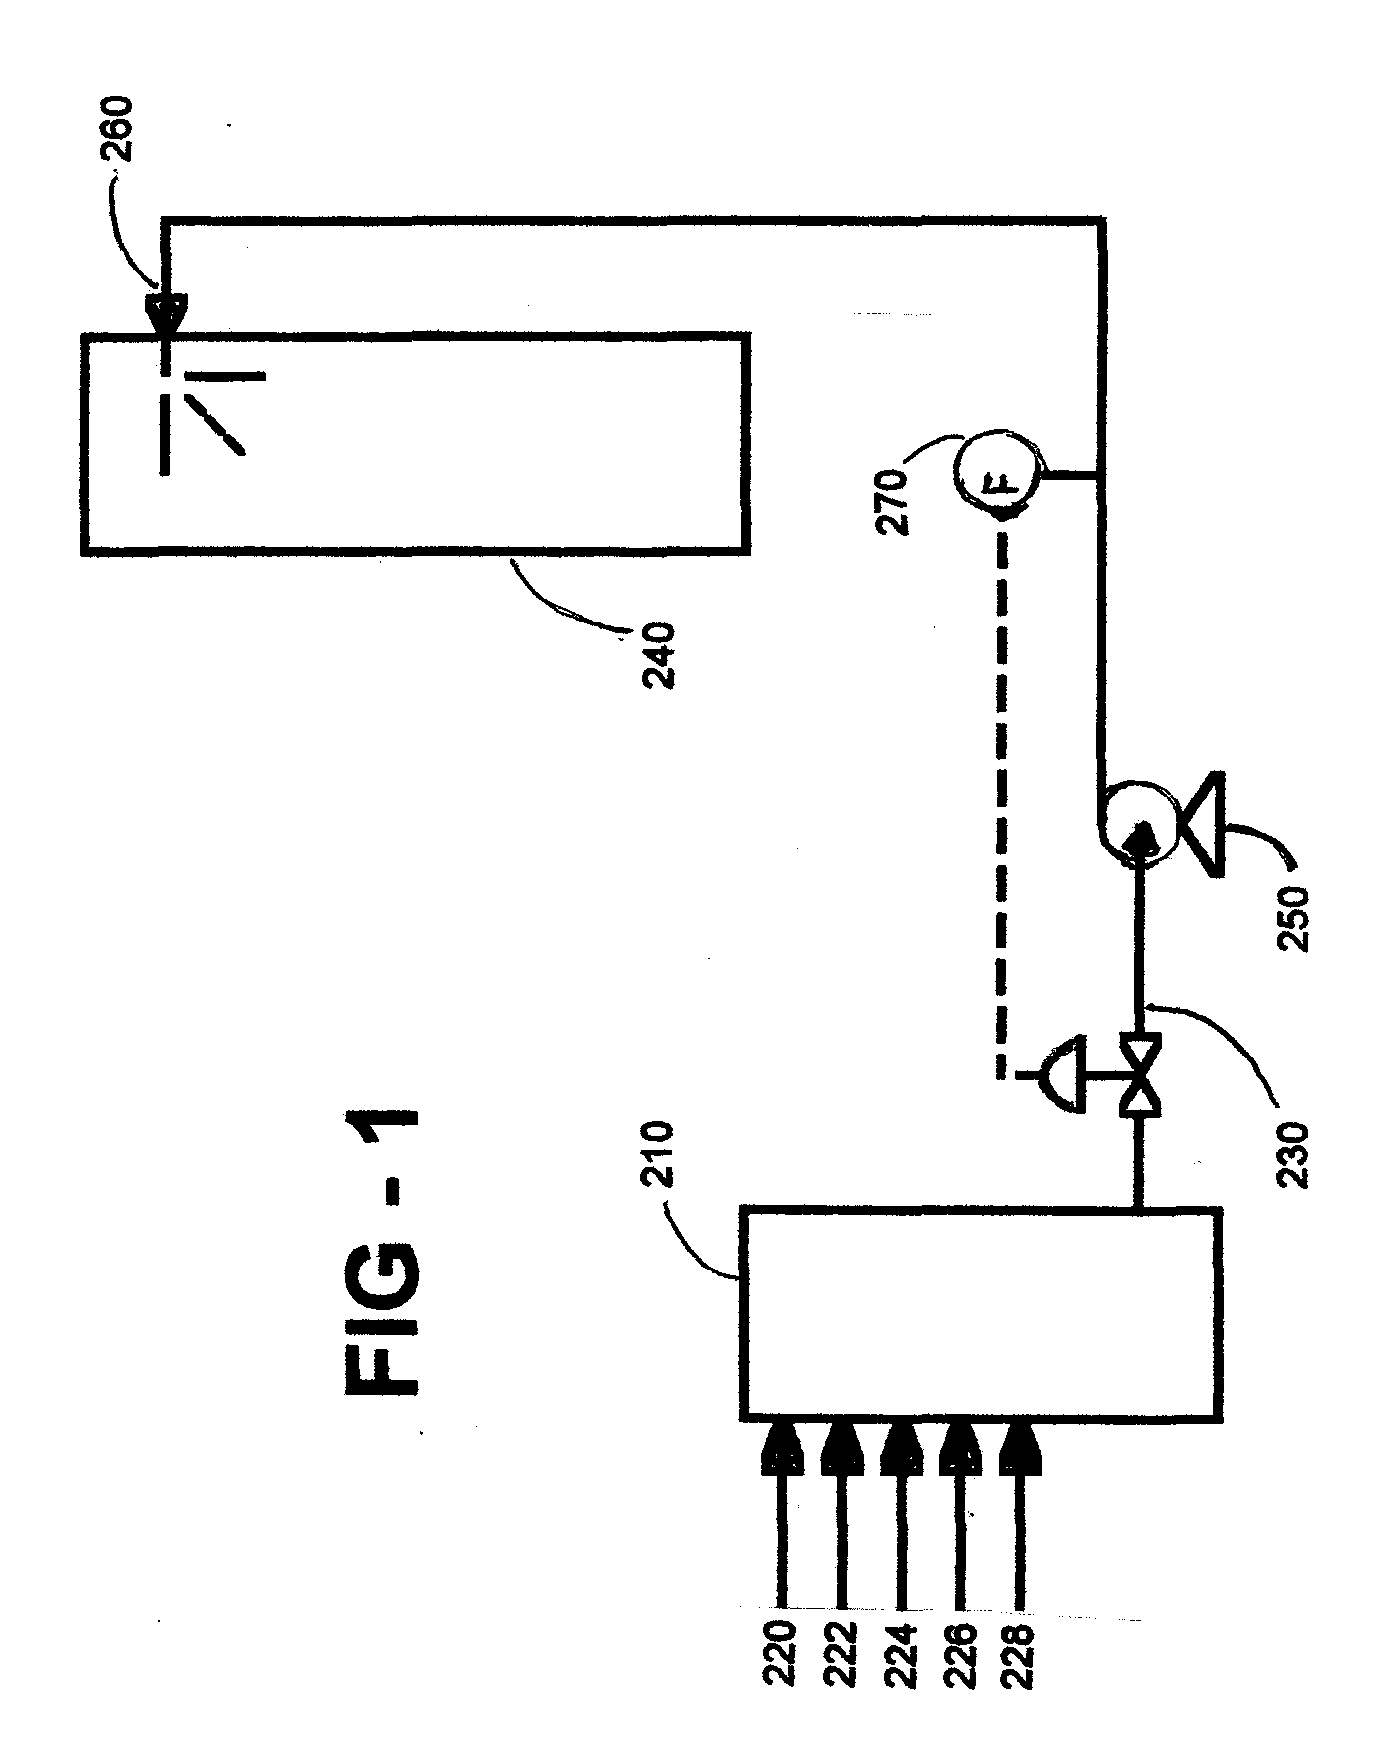 System and Method of Introducing an Additive with a Unique Catalyst to a Coking Process